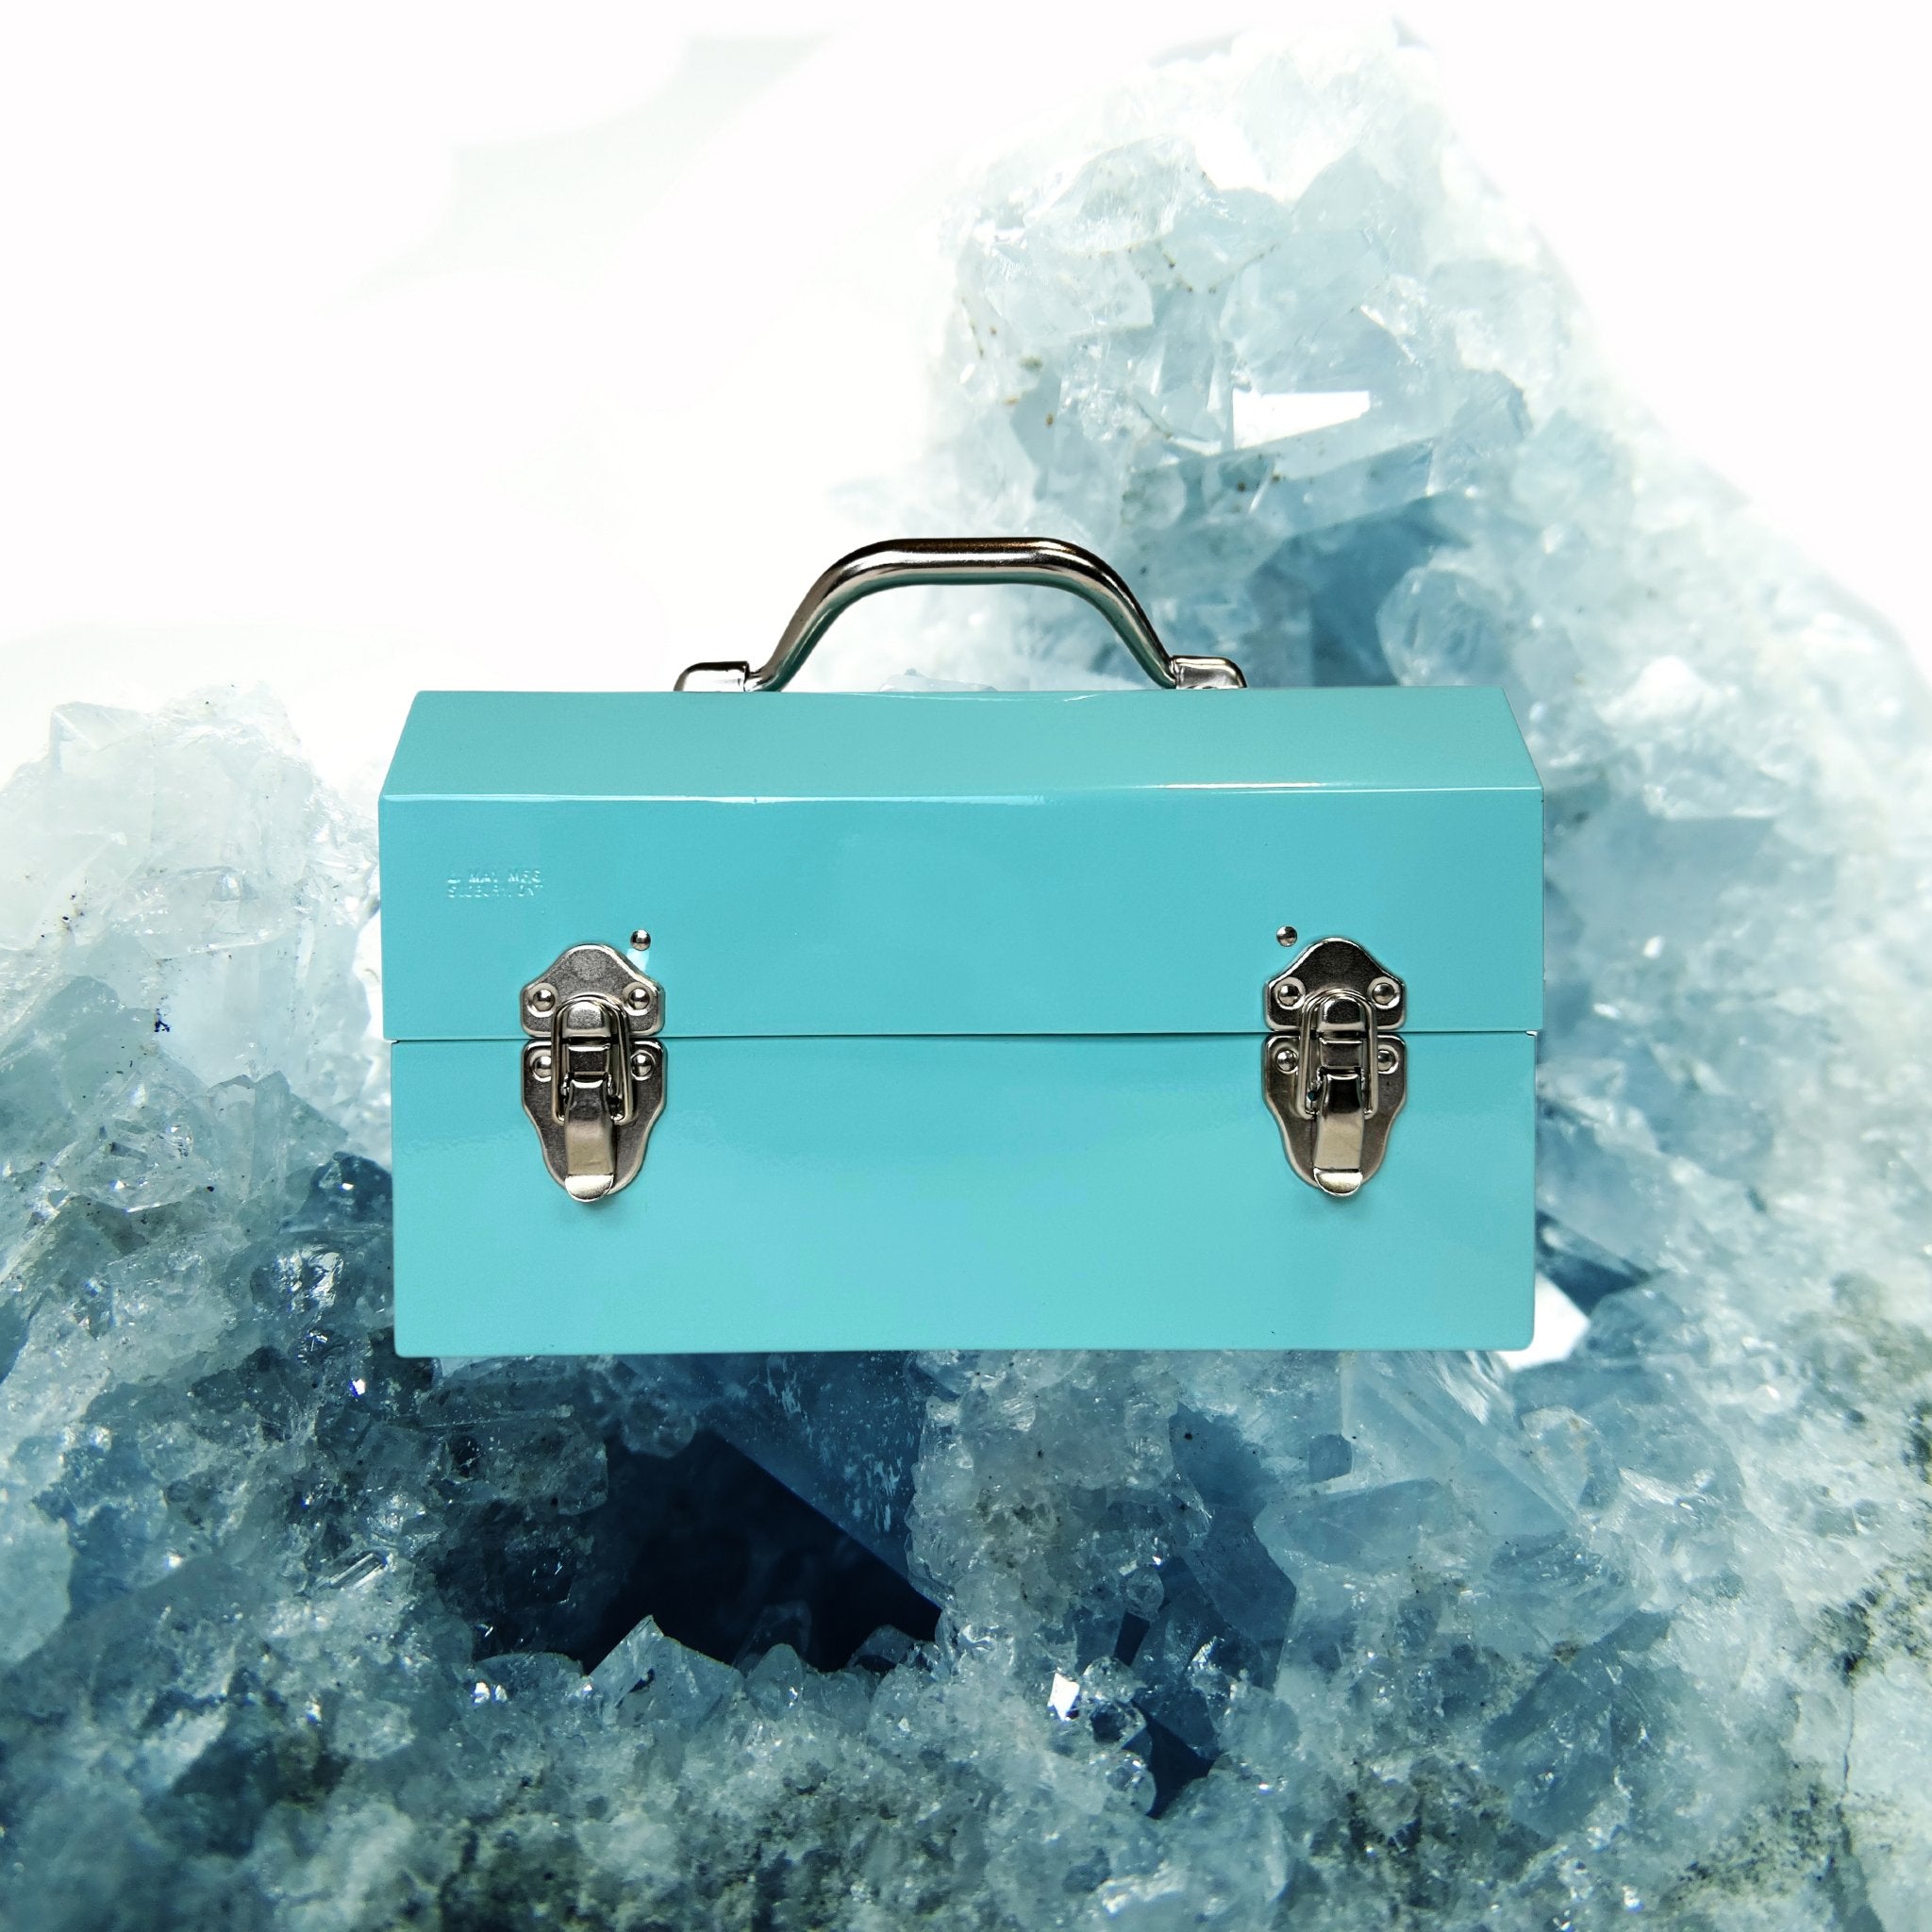 Welcome Our New Gem - Aquamarine! - The Miners Lunchbox